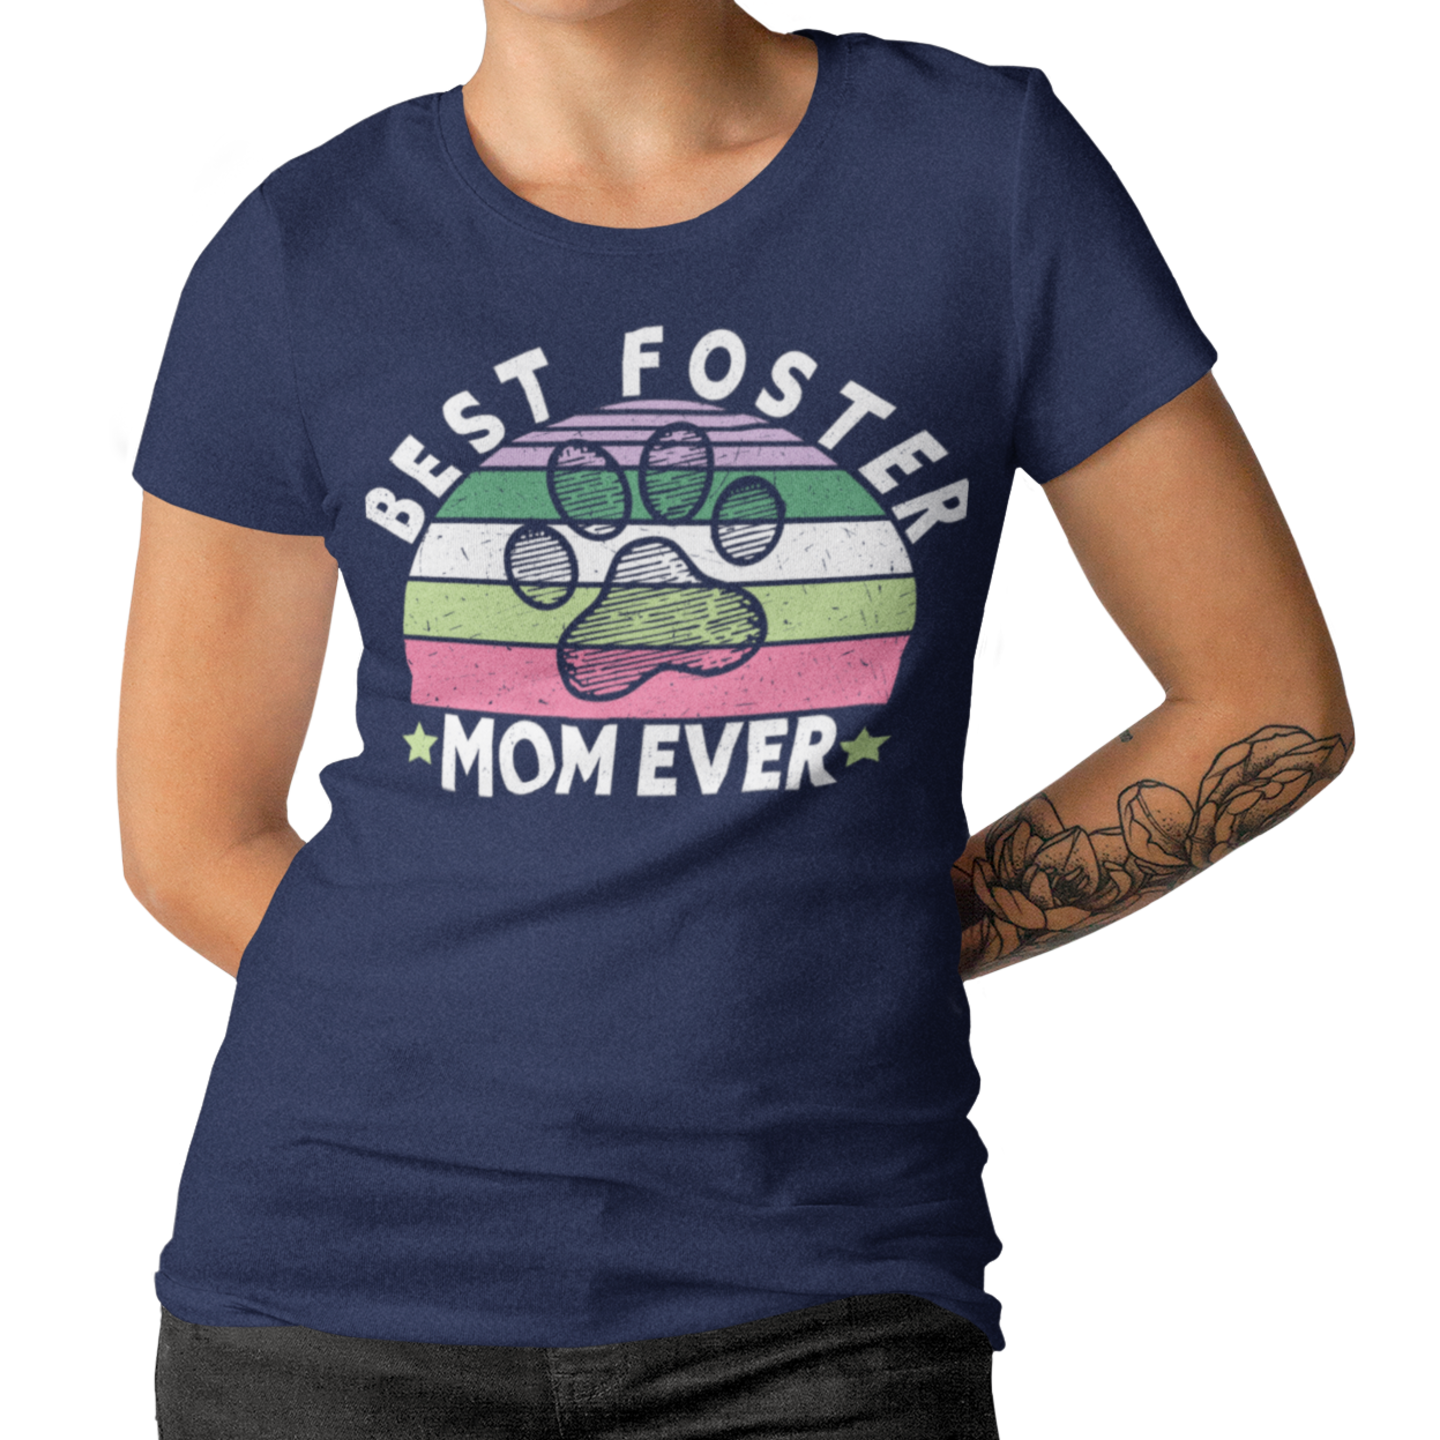 BEST FOSTER MOM EVER - Foster Mom Things